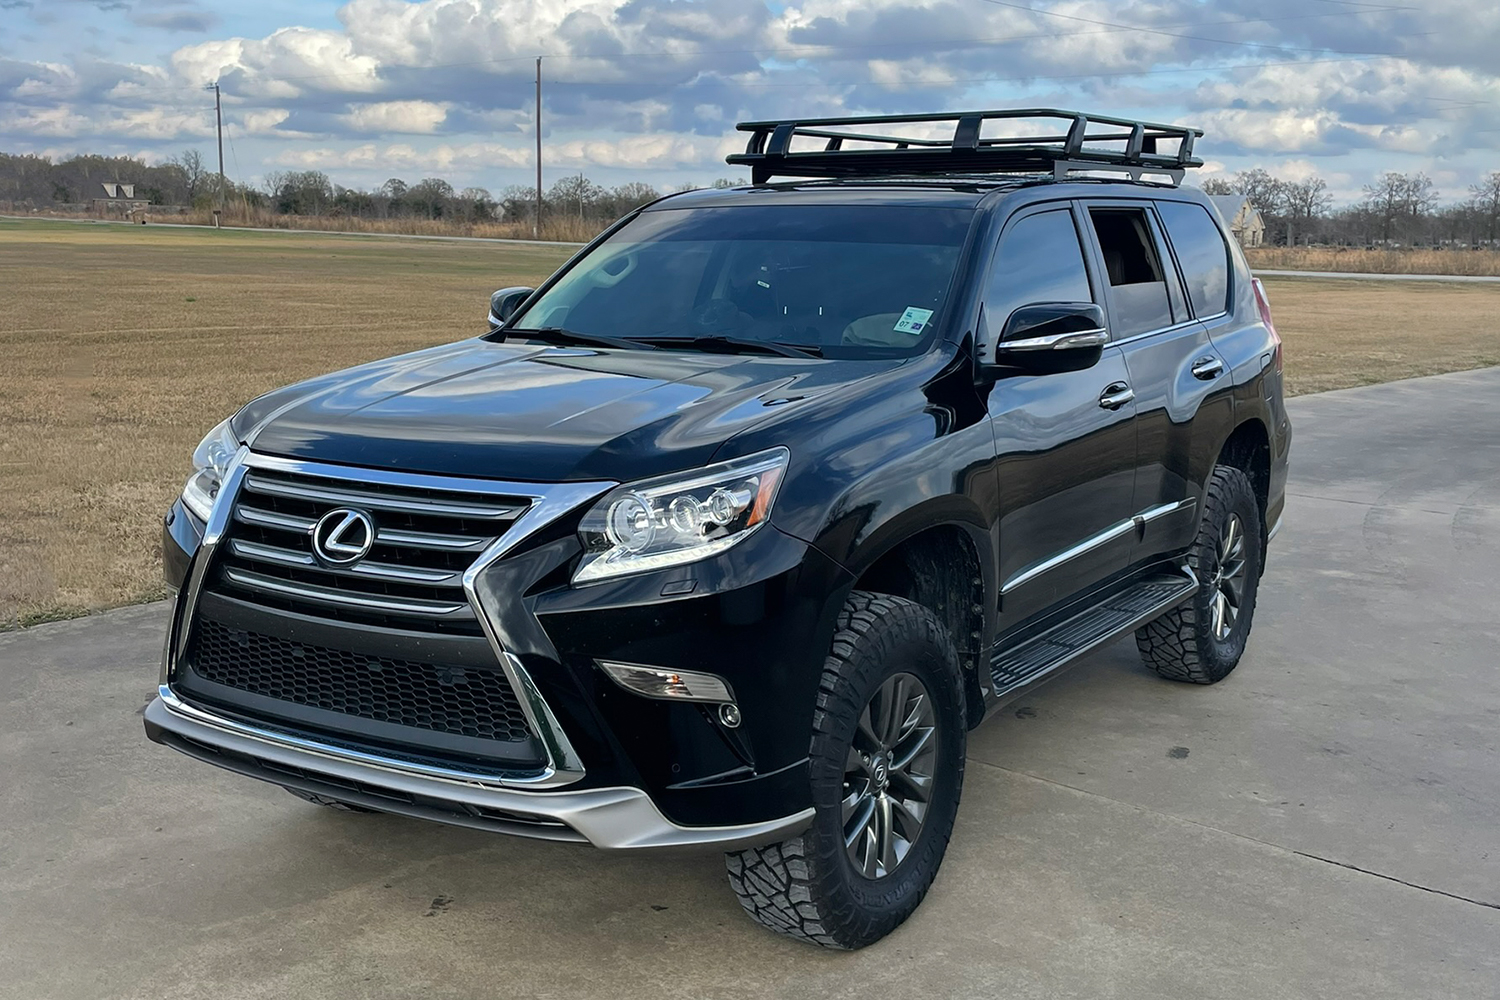 Alloy Roof Rack Basket - 6' Length Suited For Lexus GX460 2010+ Questions & Answers